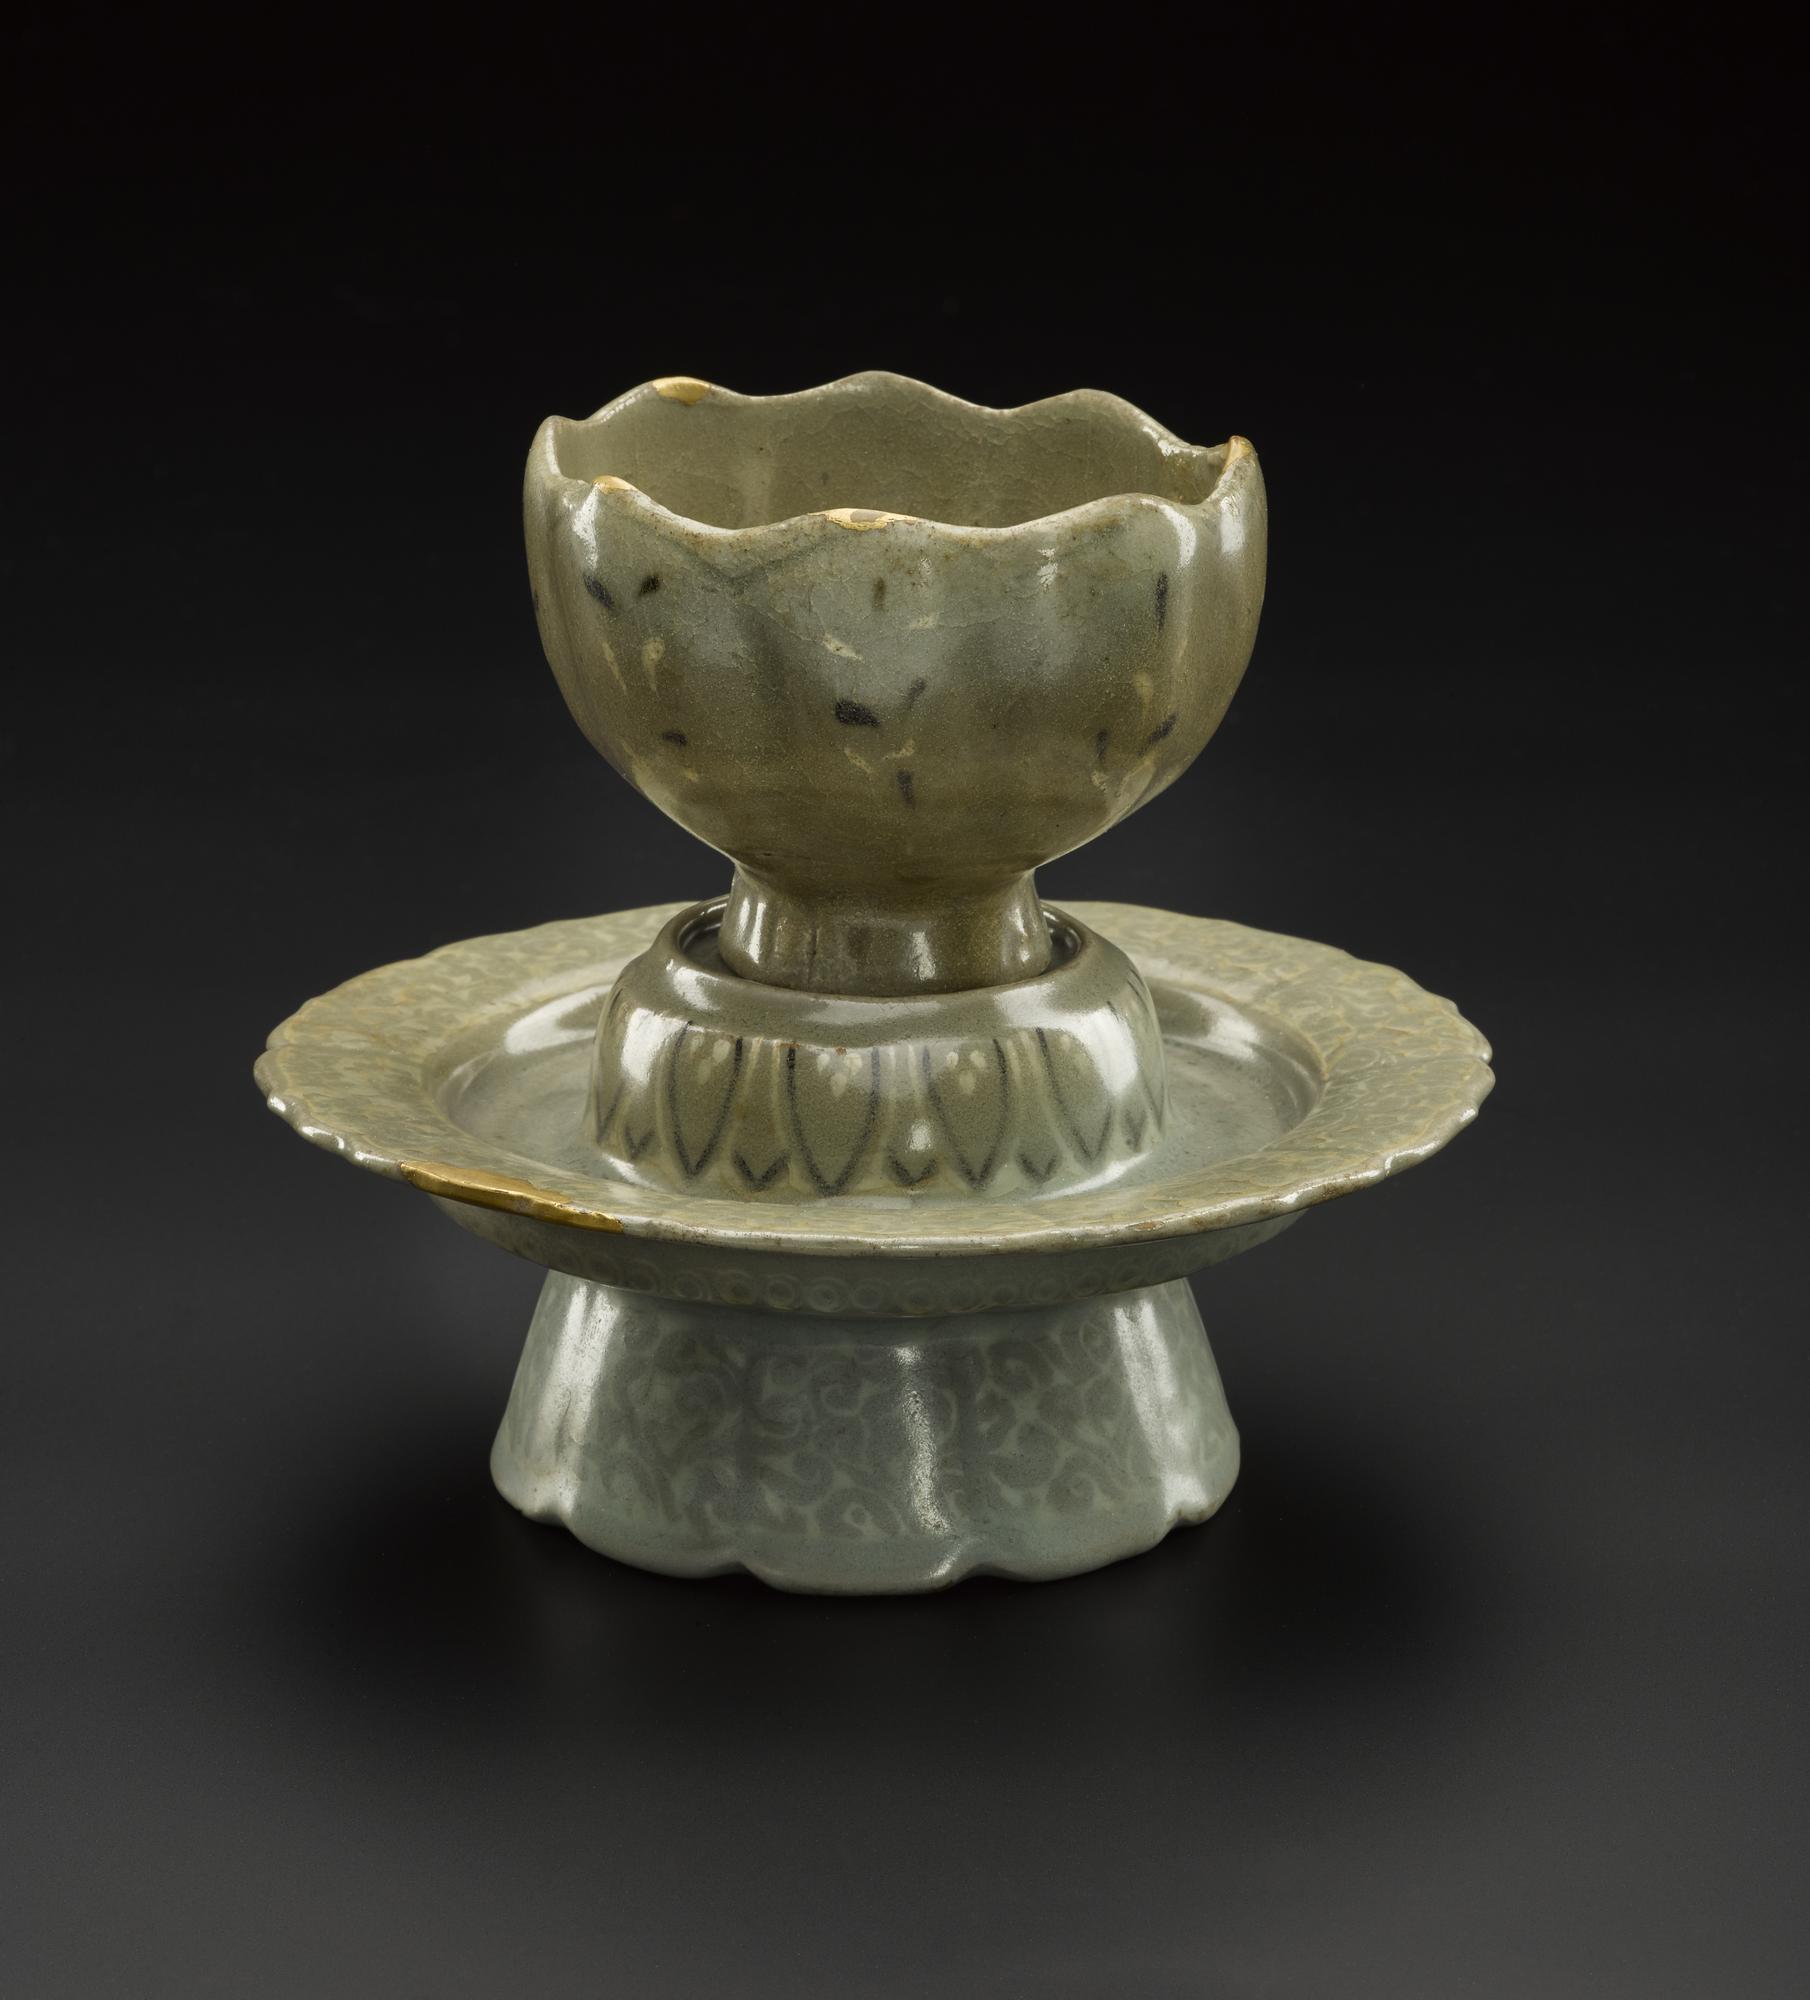 Lotus-shaped cup and stand of stoneware, decorated with inlaid designs in white and brown slip under a blue-green glaze: Korea, Goryeo Dynasty, 918 - 1392 AD.